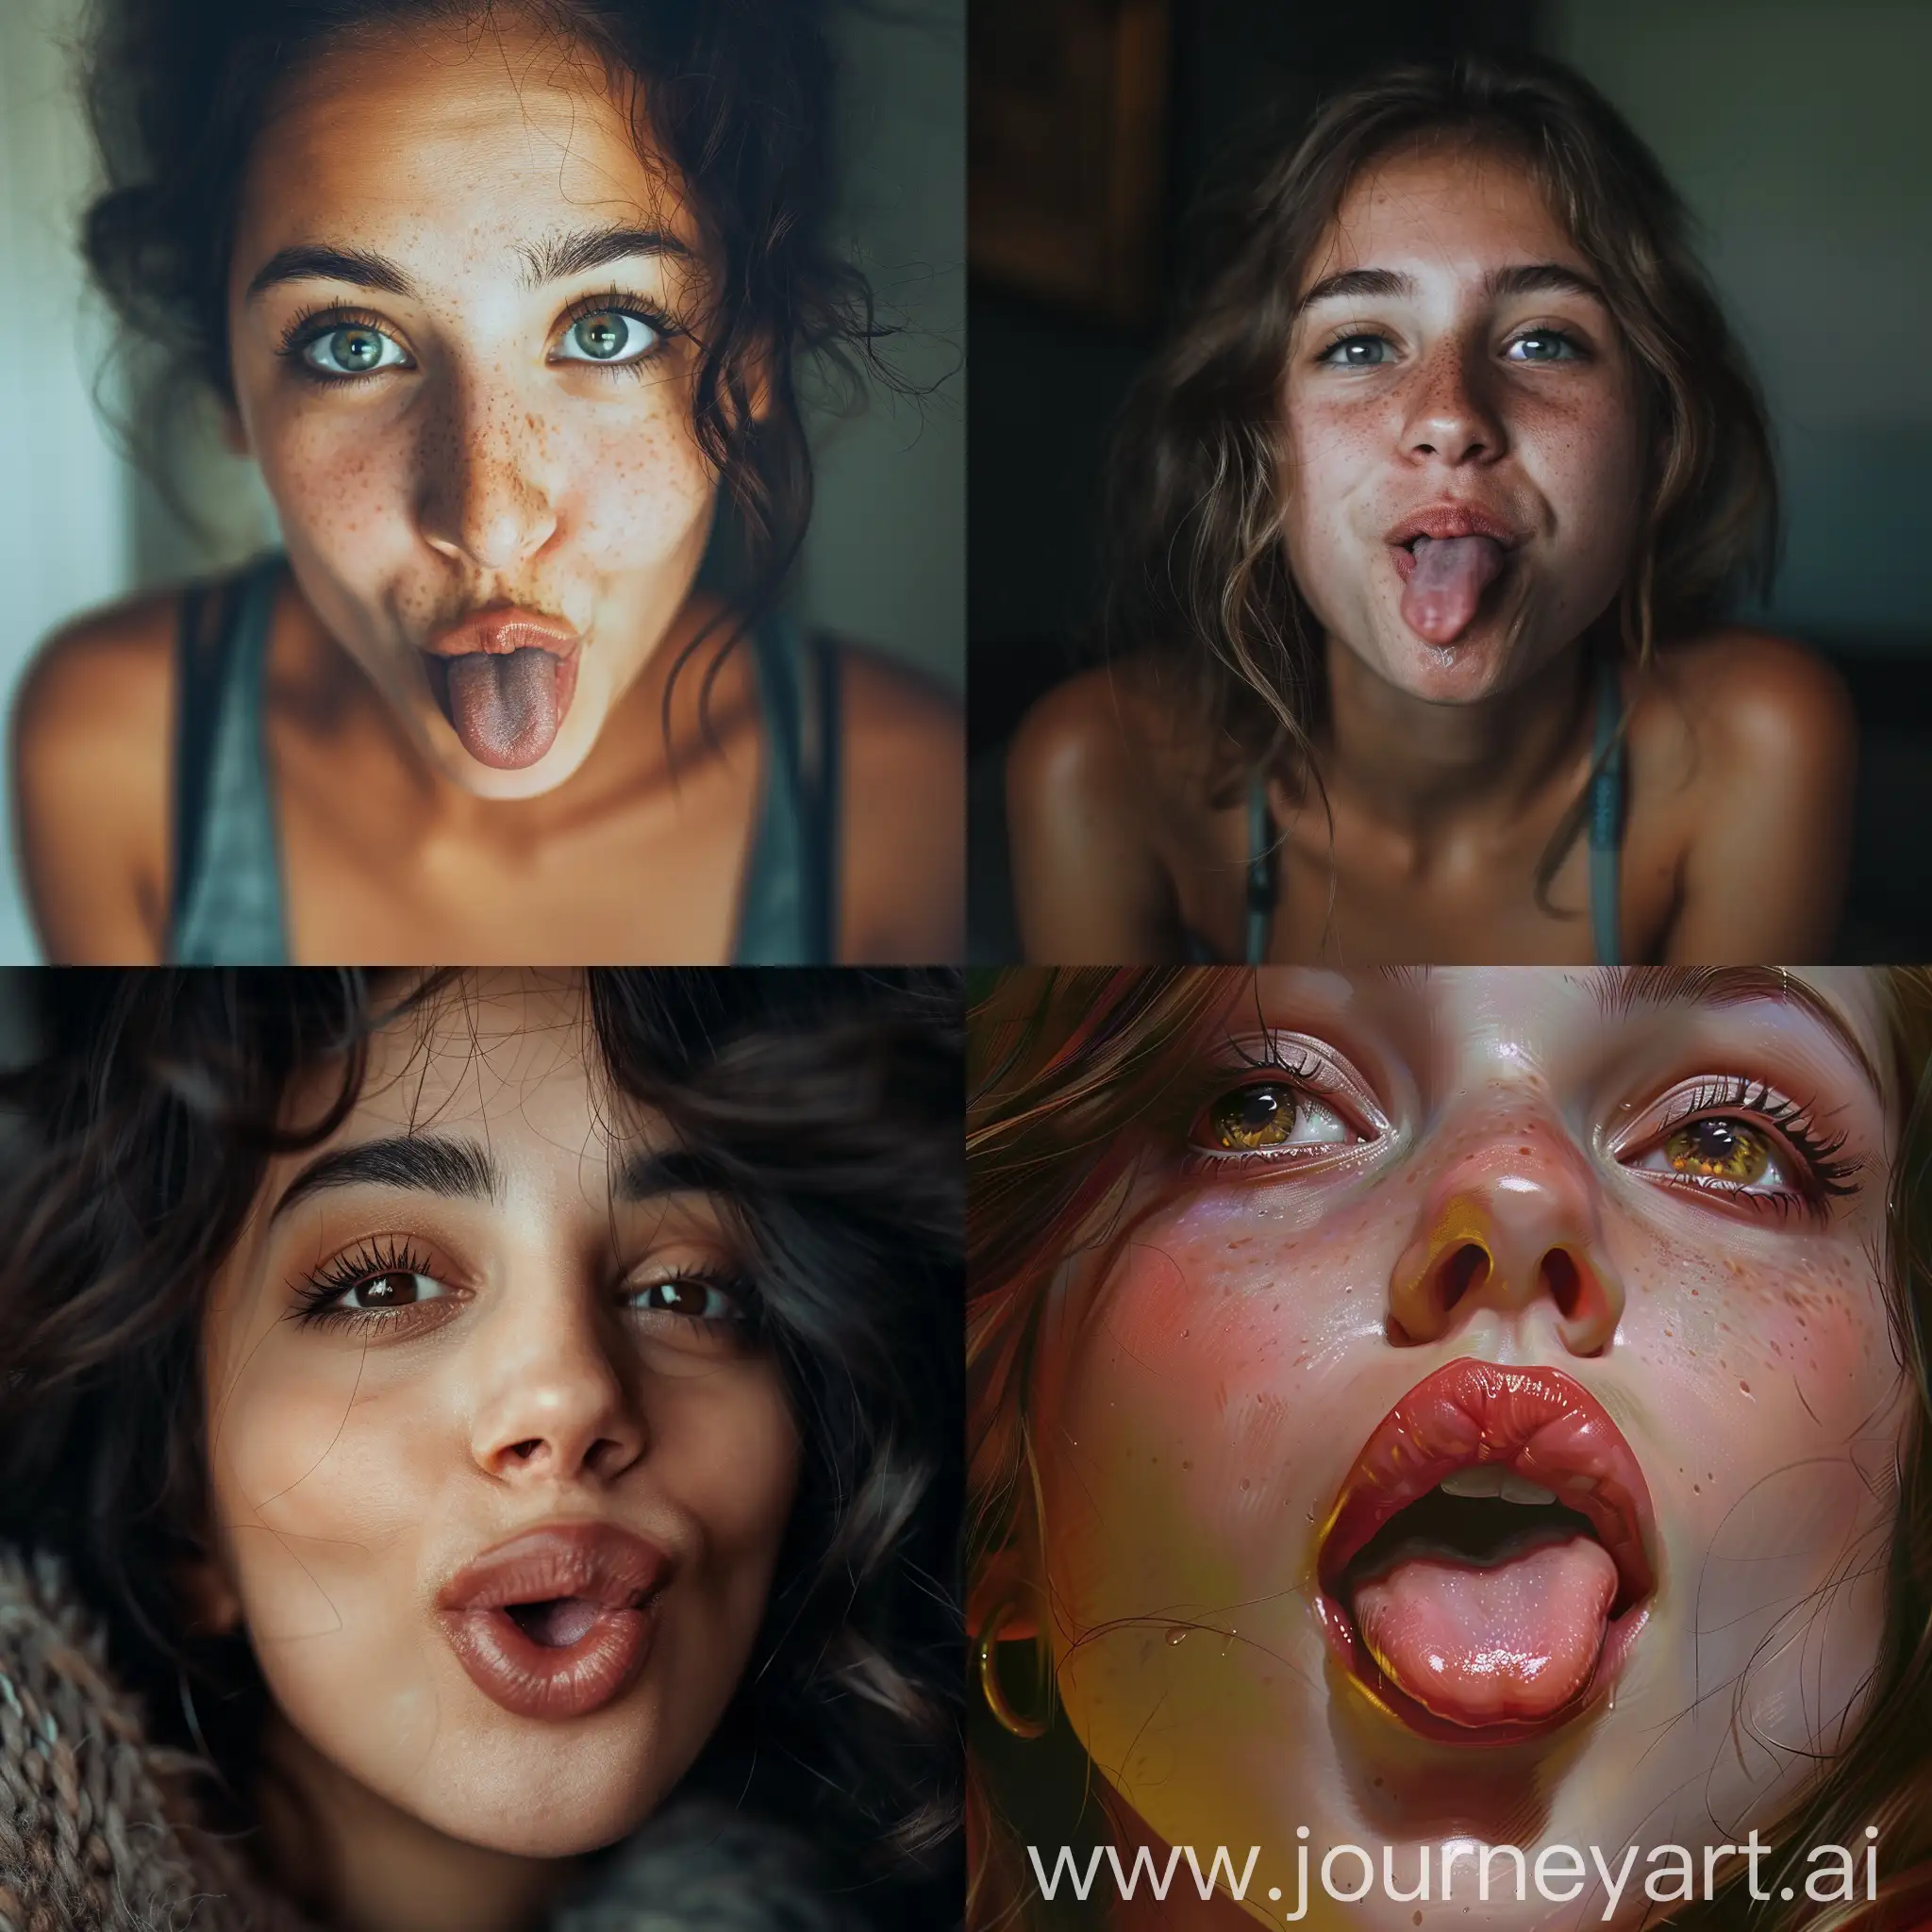 Playful-Beautiful-Woman-Sticking-Out-Tongue-and-Looking-Up